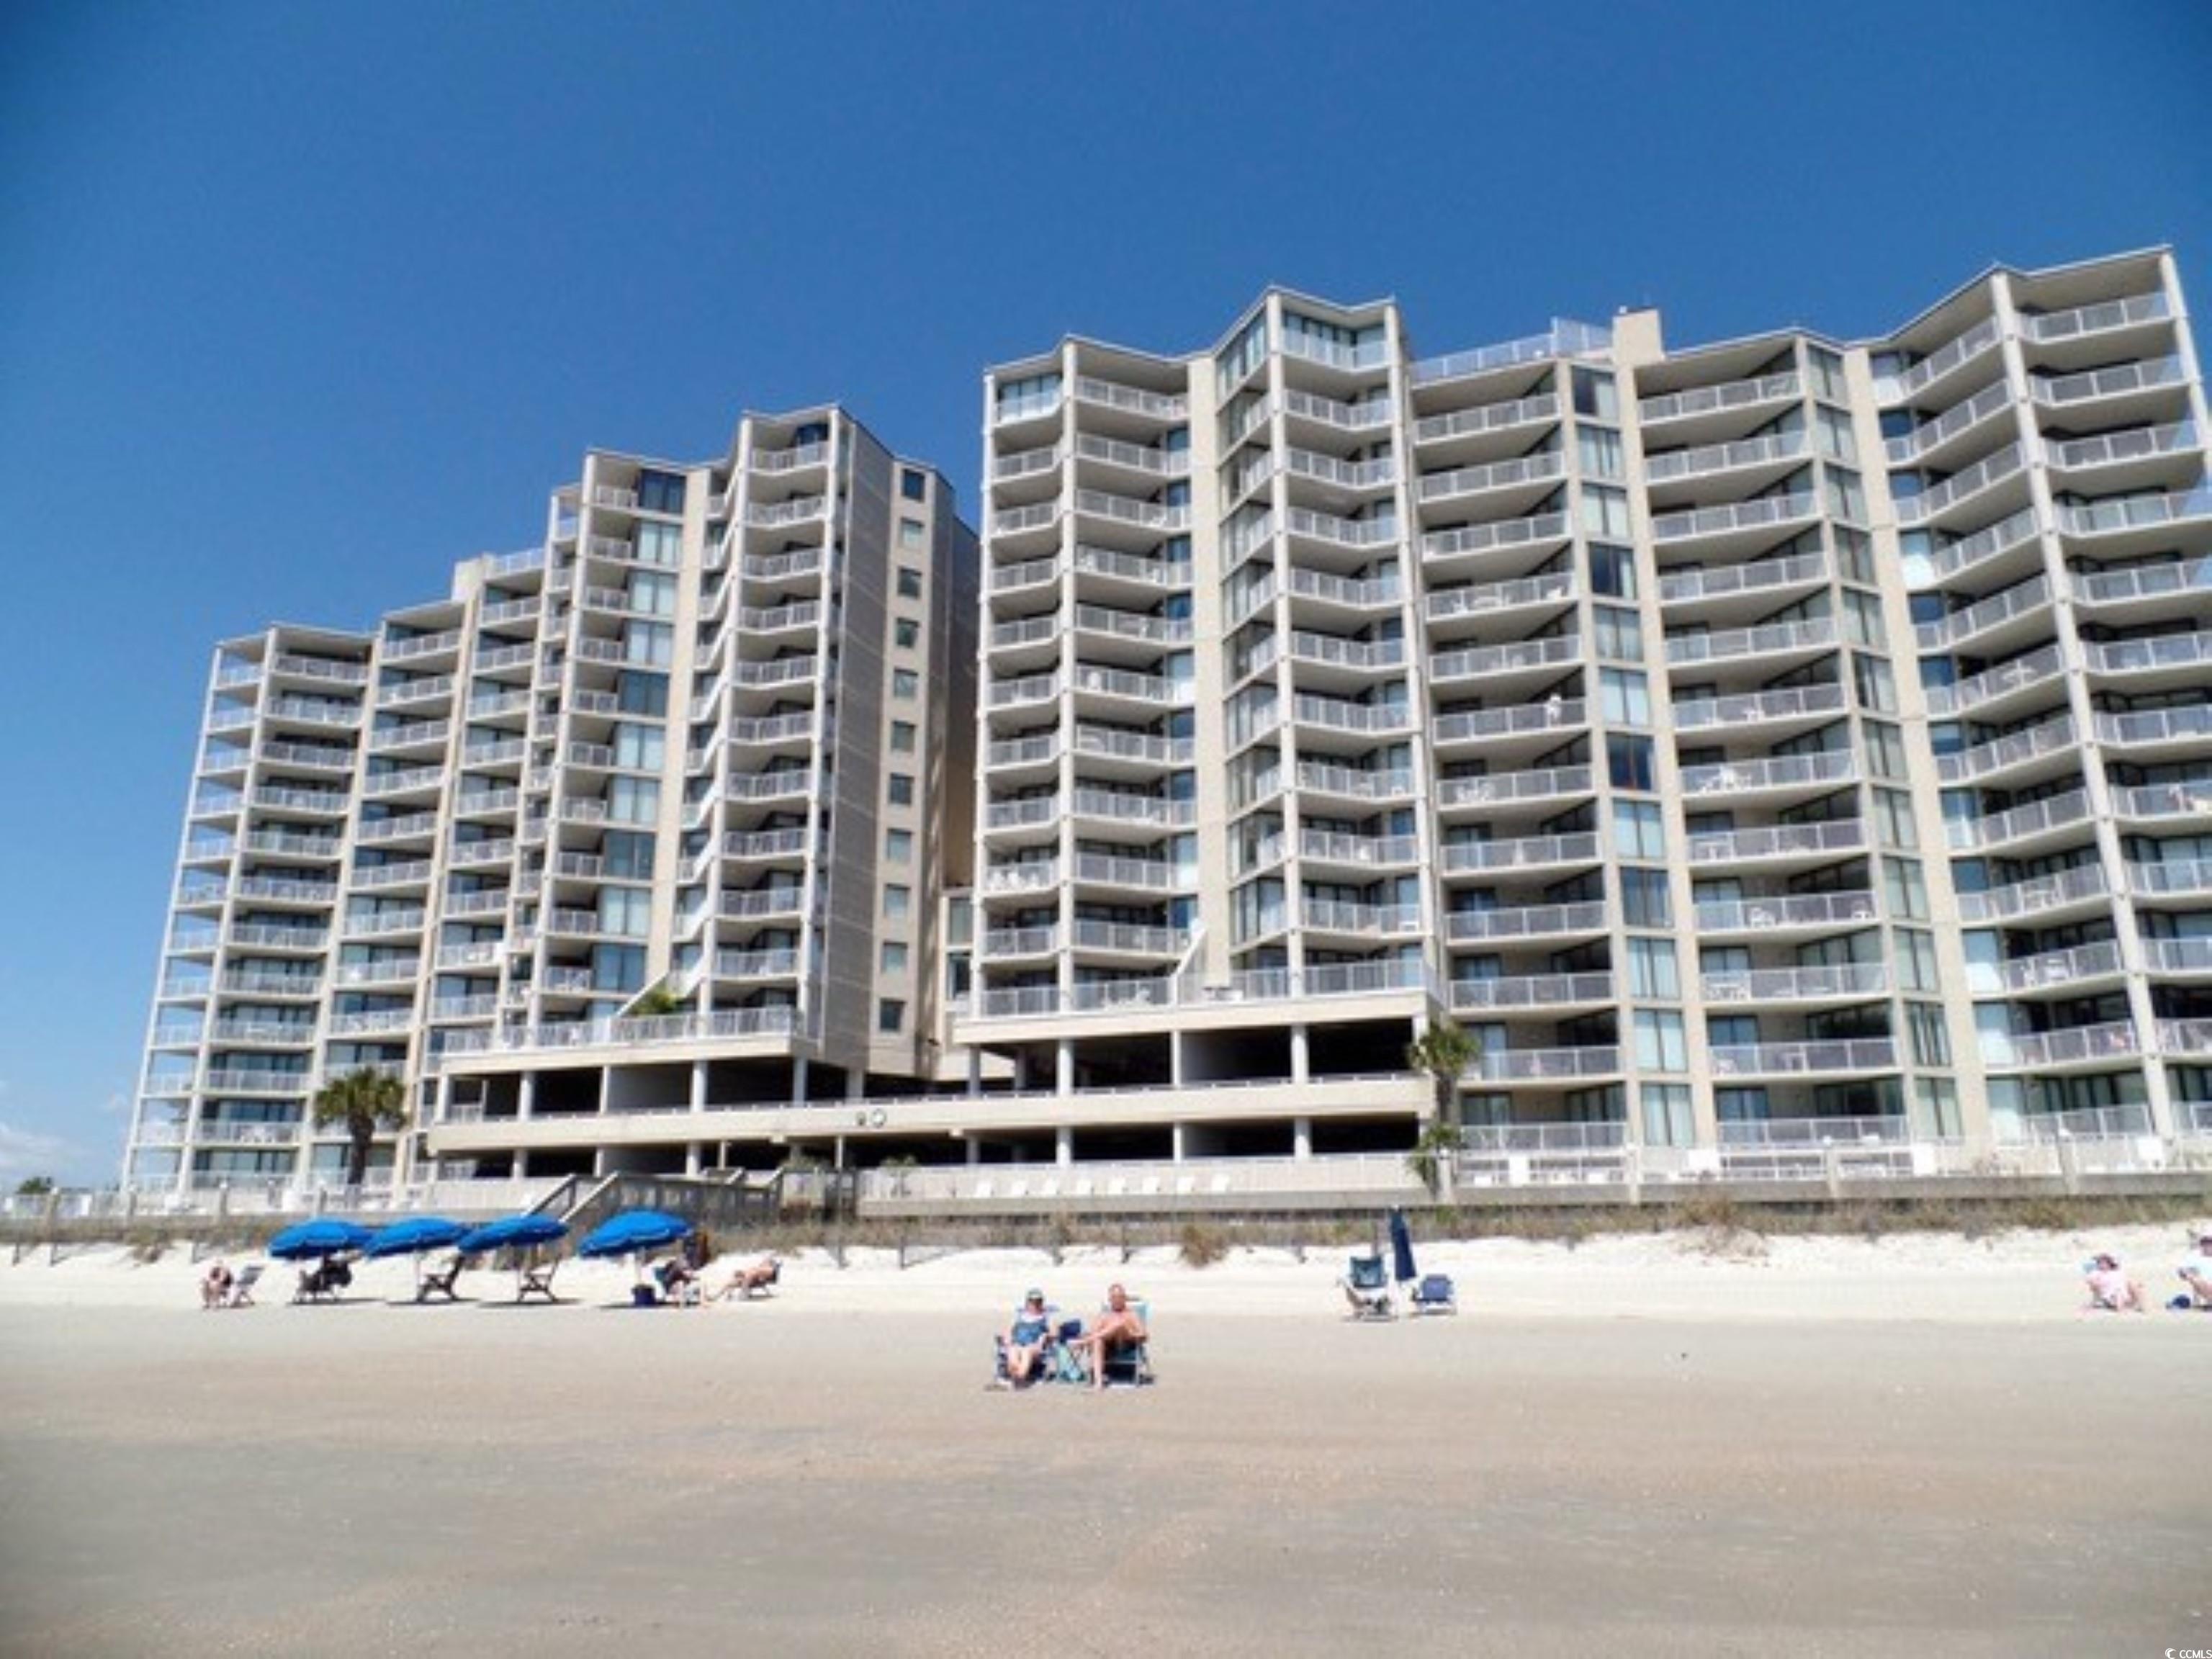 completely renovated two-bedroom, two-bath oceanfront condo in the very desirable one ocean place in the garden city area.  this unit is in the north tower on the 5th floor.  it is like new inside with new contiguous luxury vinyl wood look flooring in the living room, dining room, and foyer.  the kitchen has been redesigned with new white shaker cabinets taking advantage of every inch of space.  there is a teal tile backsplash and the countertops are granite, and the appliances are stainless steel.  both bathrooms have also been redesigned.  the master bath has a free-standing white vanity with a pedestal sink and a large tiled shower with a custom glass door.  the living room, dining room, and kitchen area are approximately 15' x 29' and have spectacular ocean views through an angled glass wall of ceiling-to-floor windows.  the balcony is large and recessed for privacy.  the master is also oceanfront with a king bed.  the second bedroom has 2 twin beds (or 1 king) and private access to the hall bath.  the building has a gym for owners, a lounge, two pools, and two heated hot tubs.  pool decks are elevated and provide fantastic ocean views for lounge chairs.  great for a primary residence, second home or rental.  a must see and move-in ready.